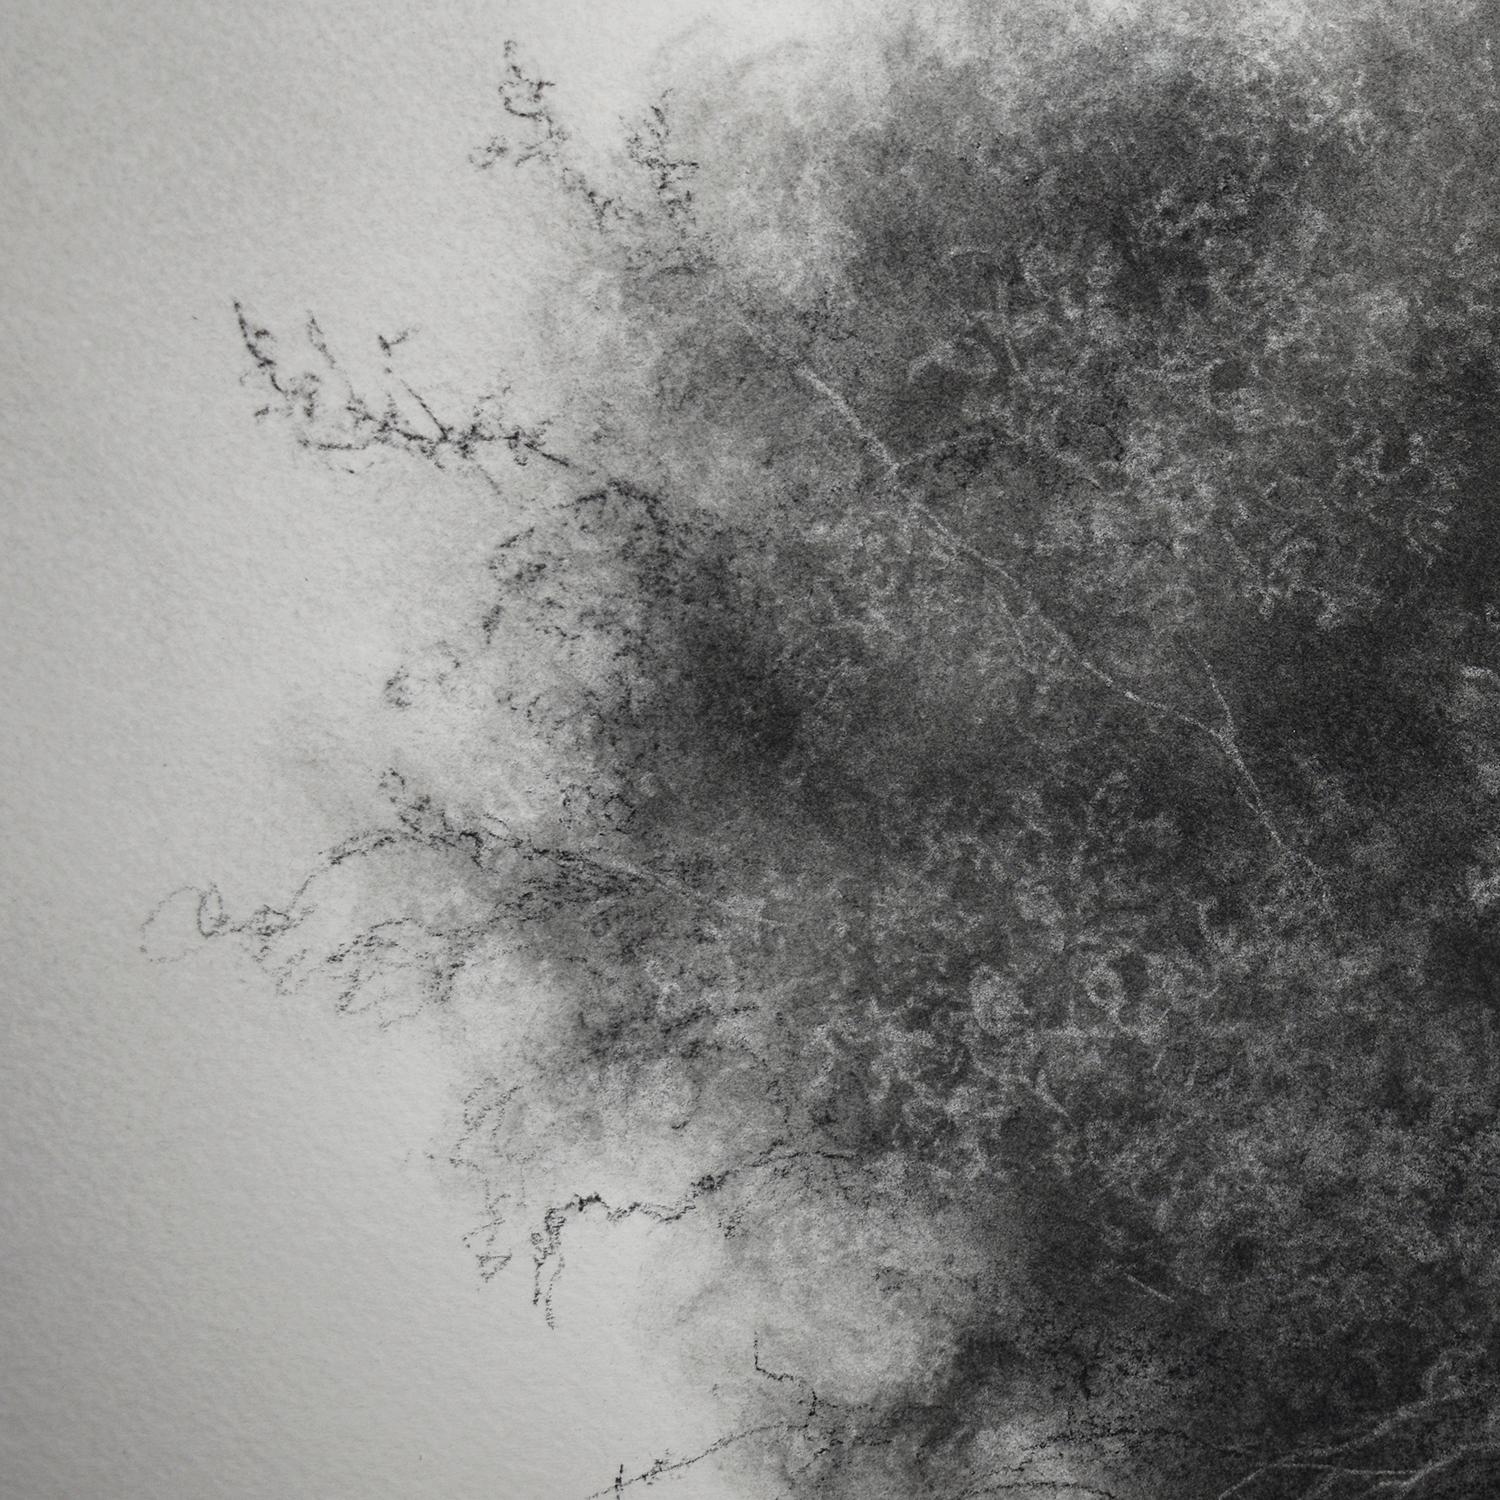 Wallflower (Moody Charcoal Landscape Drawing of Tree) - Contemporary Art by Sue Bryan